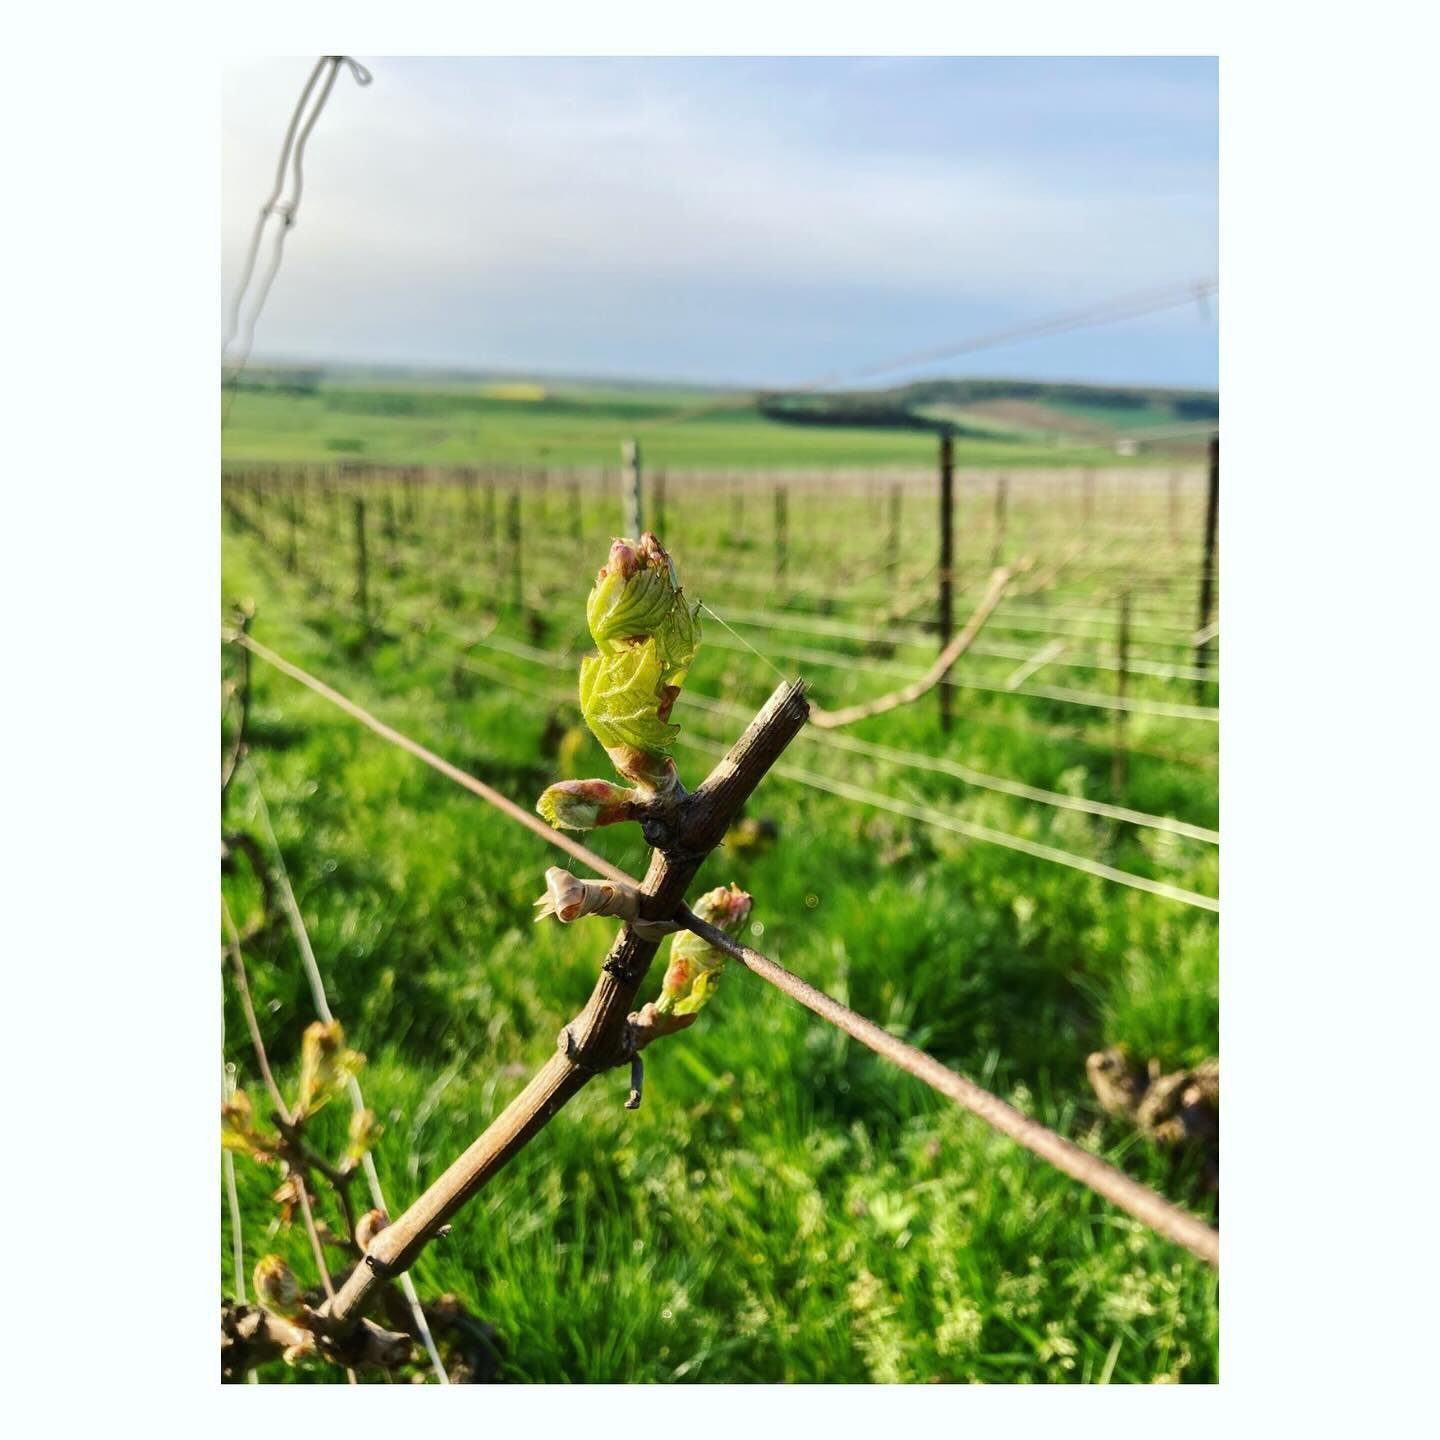 Meanwhile in the vineyards&hellip; a wonderful sunshiny sunday the buds decided to remove the wintercoat for good, stretch out and start moving. Here&rsquo;s one bud turned leaf to enjoy&hellip; (behind there&rsquo;s a picture from saturday to spot t